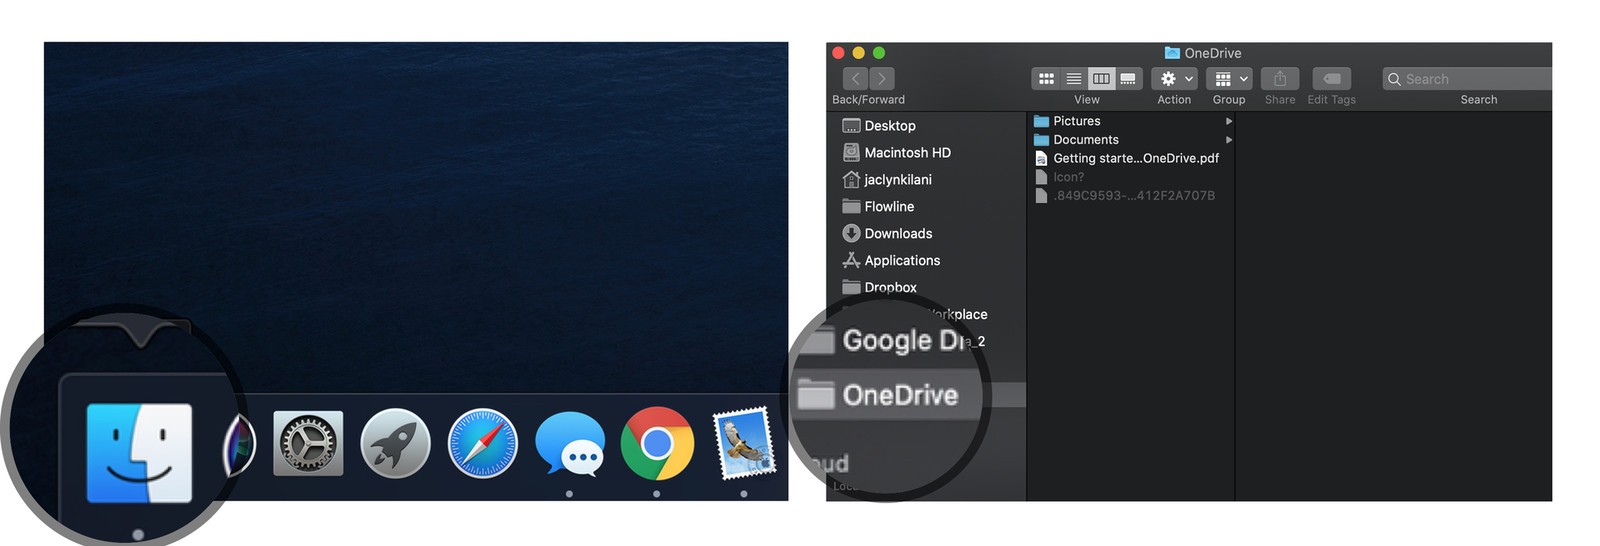 move a document for a thumbdrive to dropbox on mac